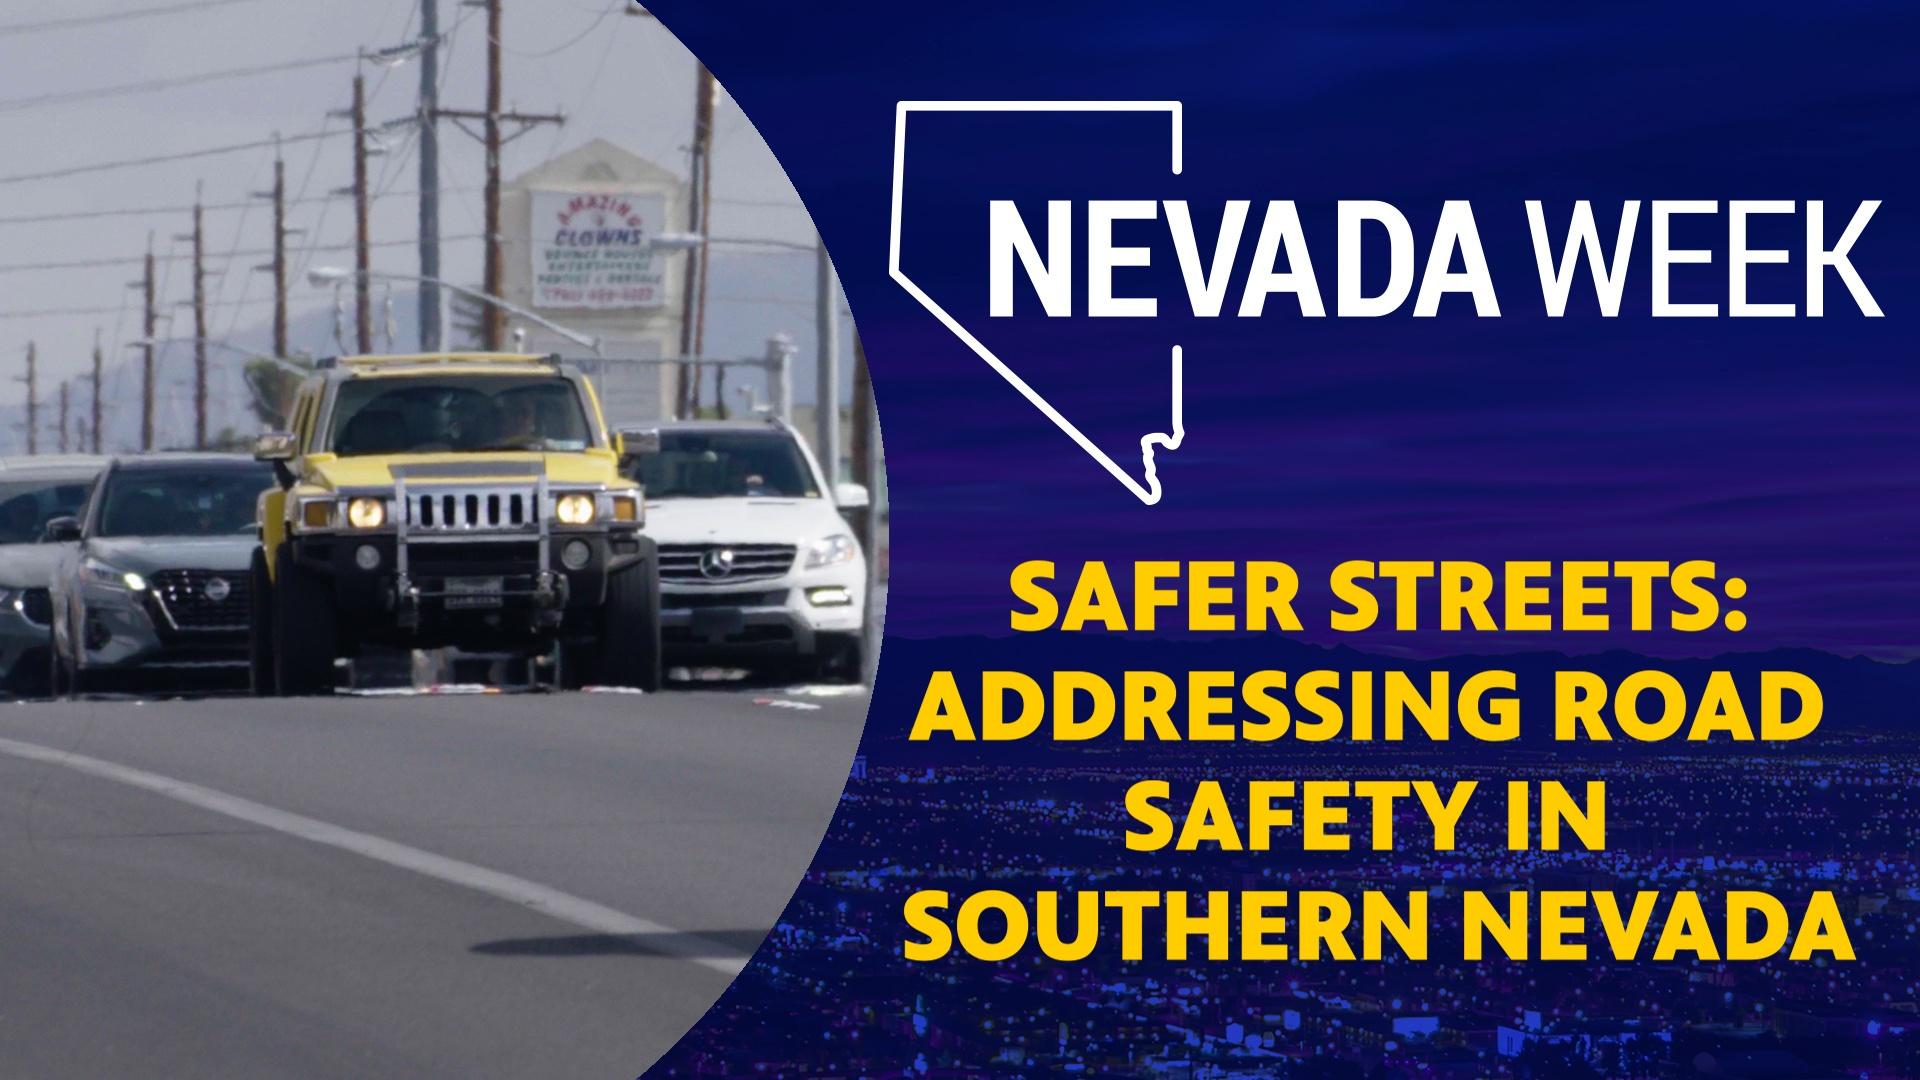 Safer Streets: Addressing Road Safety in Southern Nevada